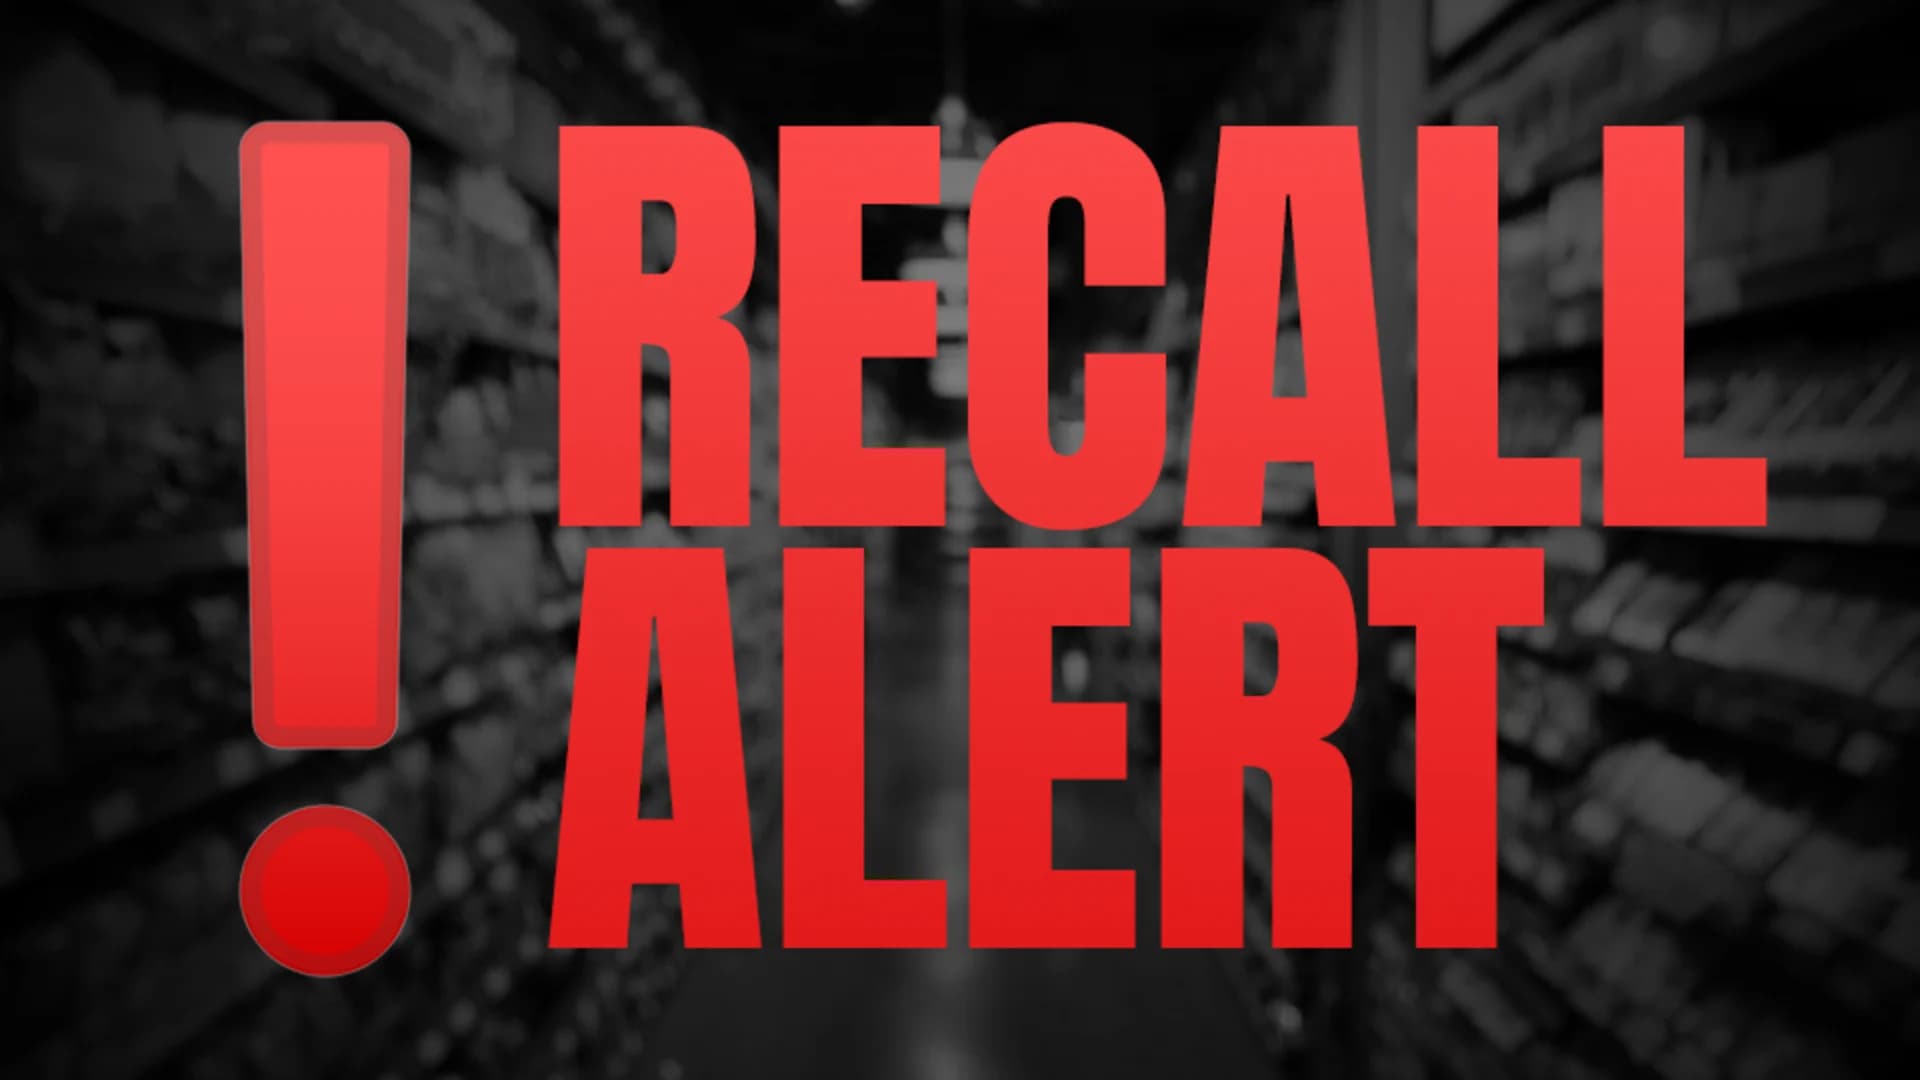 Company recalls over 32K high chairs because legs could detach